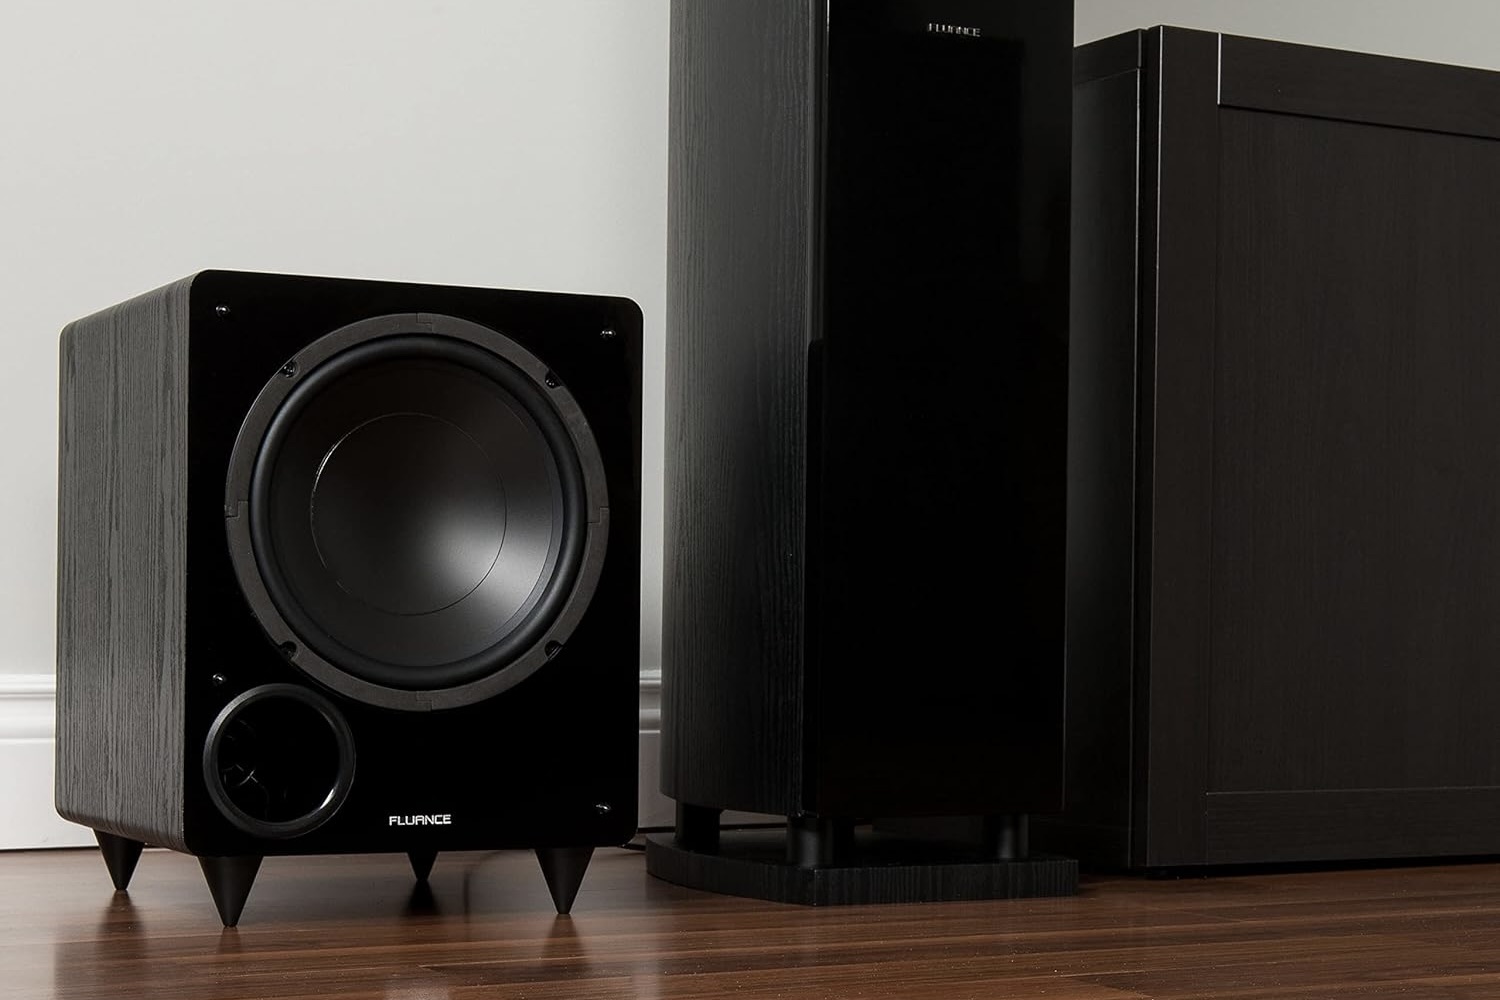 The Fluance DB10W next to a tower speaker.